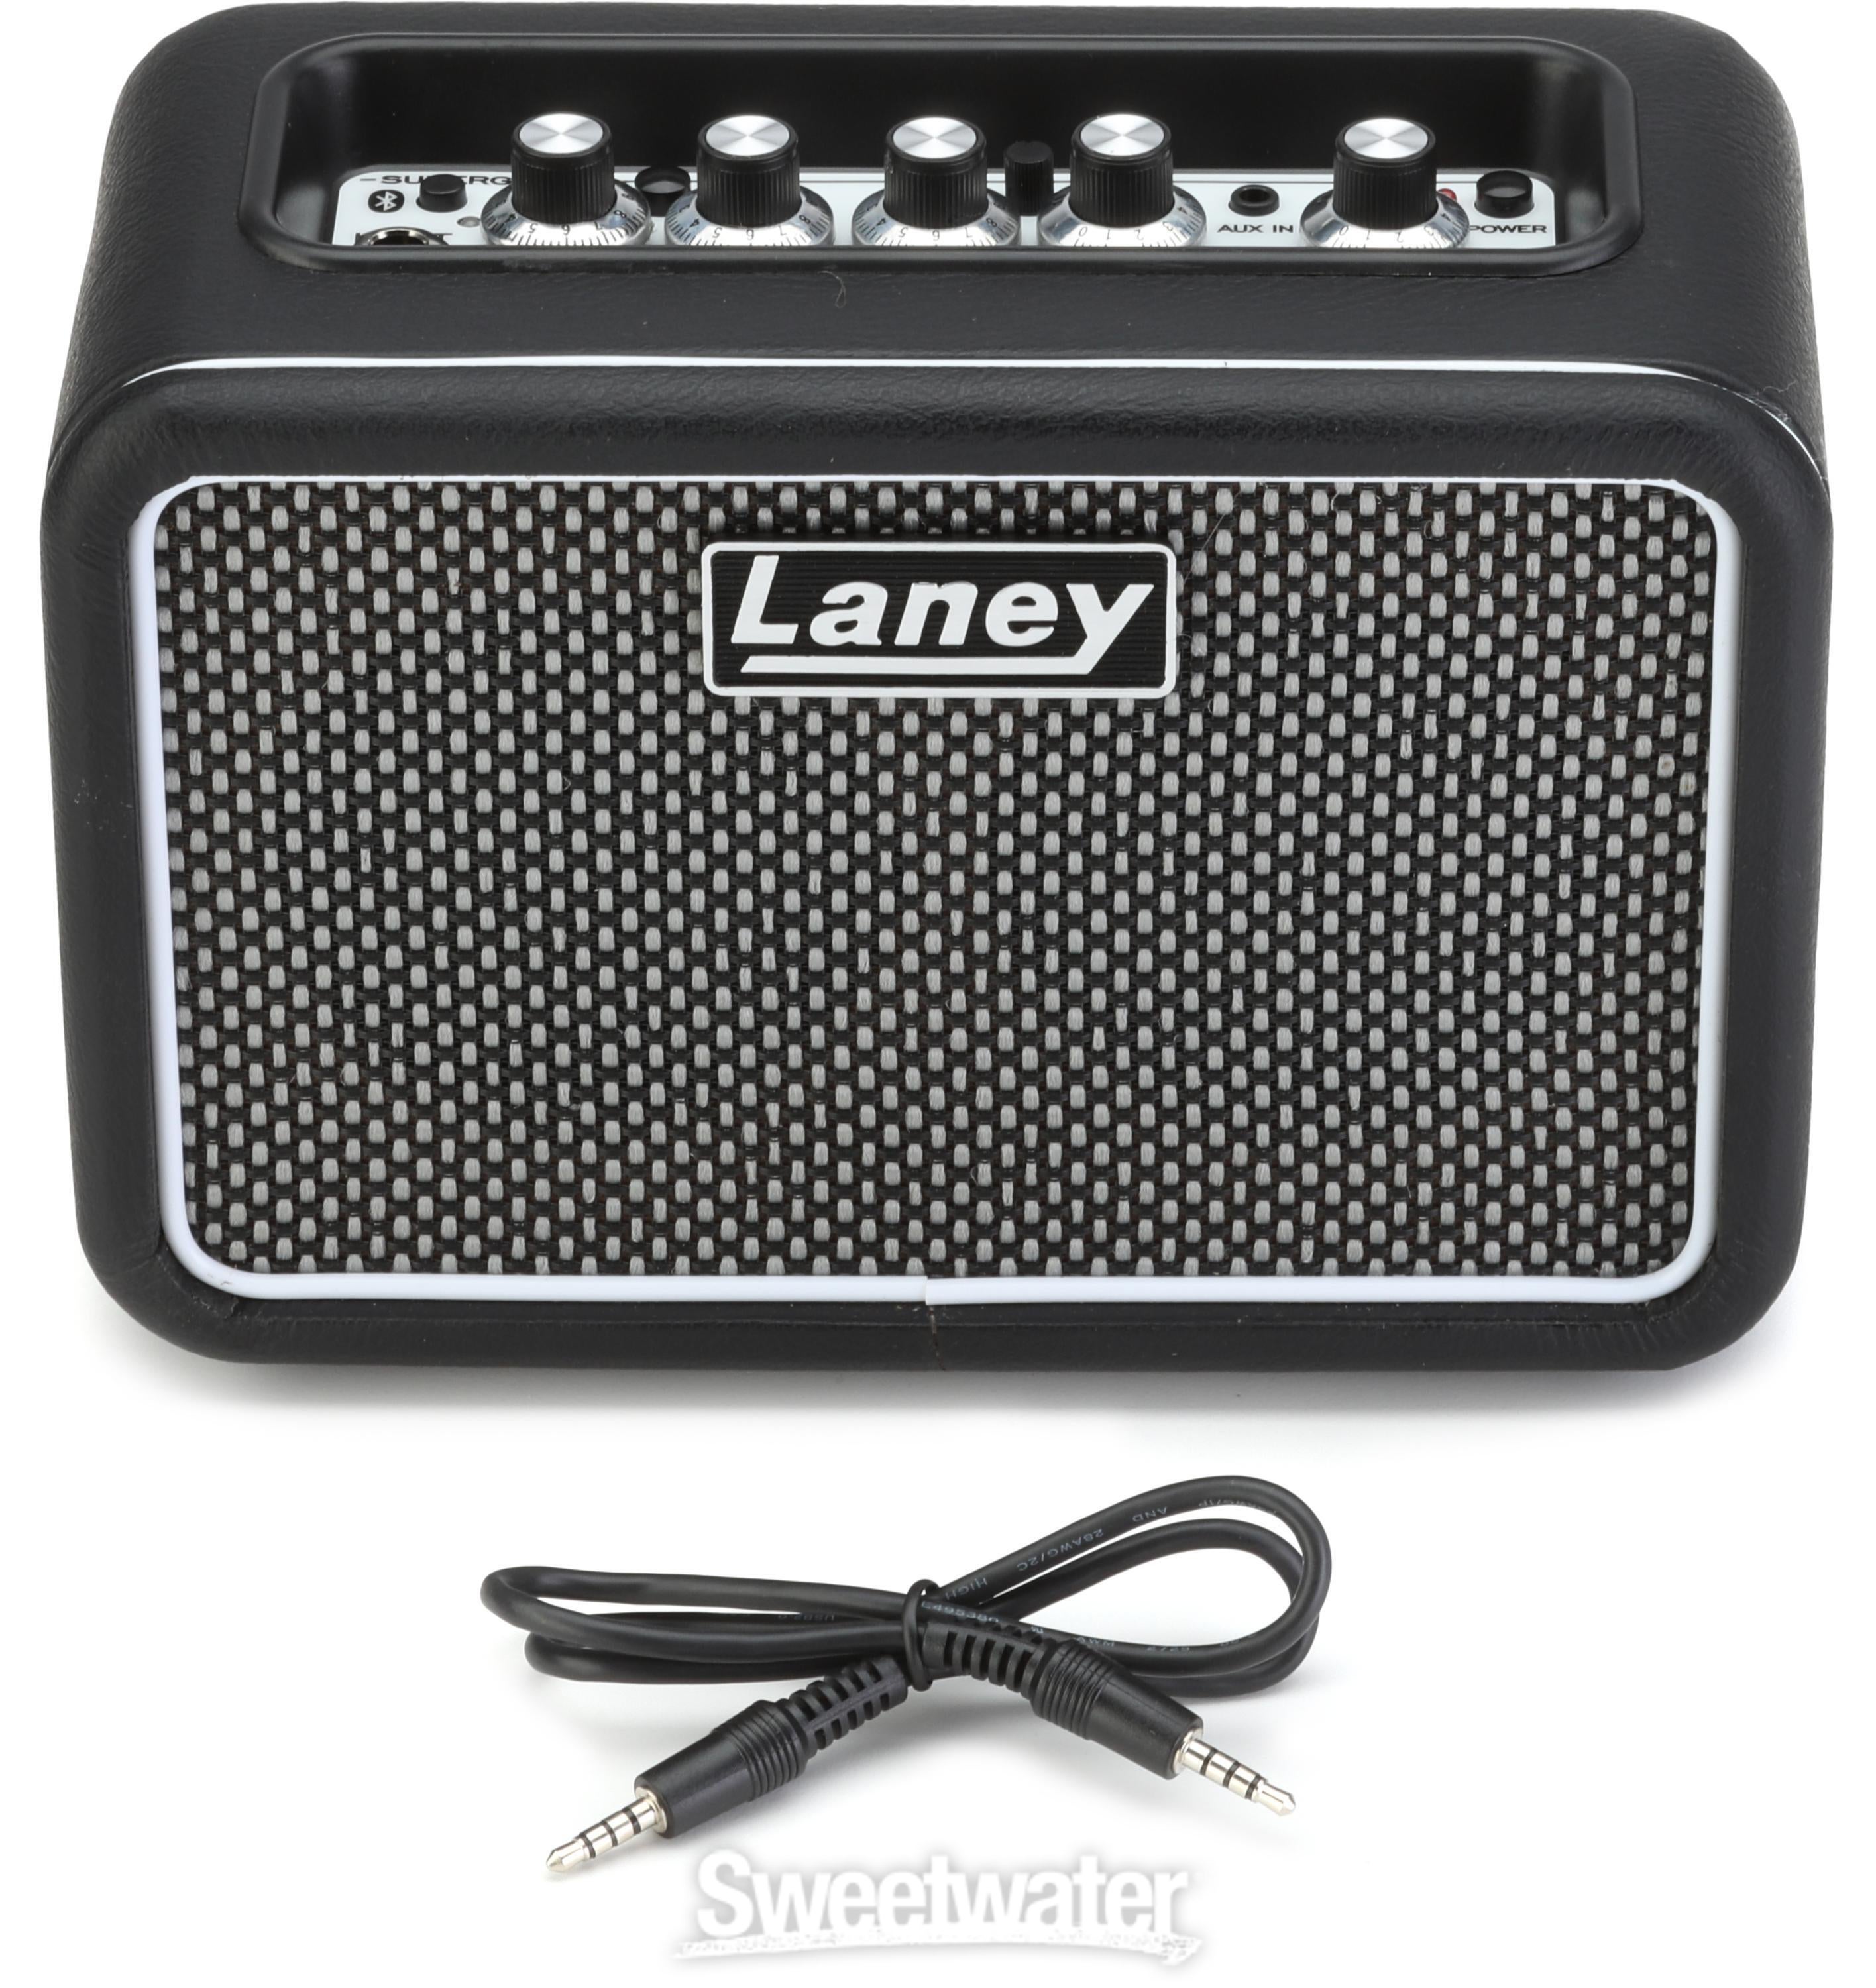 Laney Mini-STB-SuperG Battery-powered 2 x 3-inch Guitar Combo Amplifier  with Bluetooth